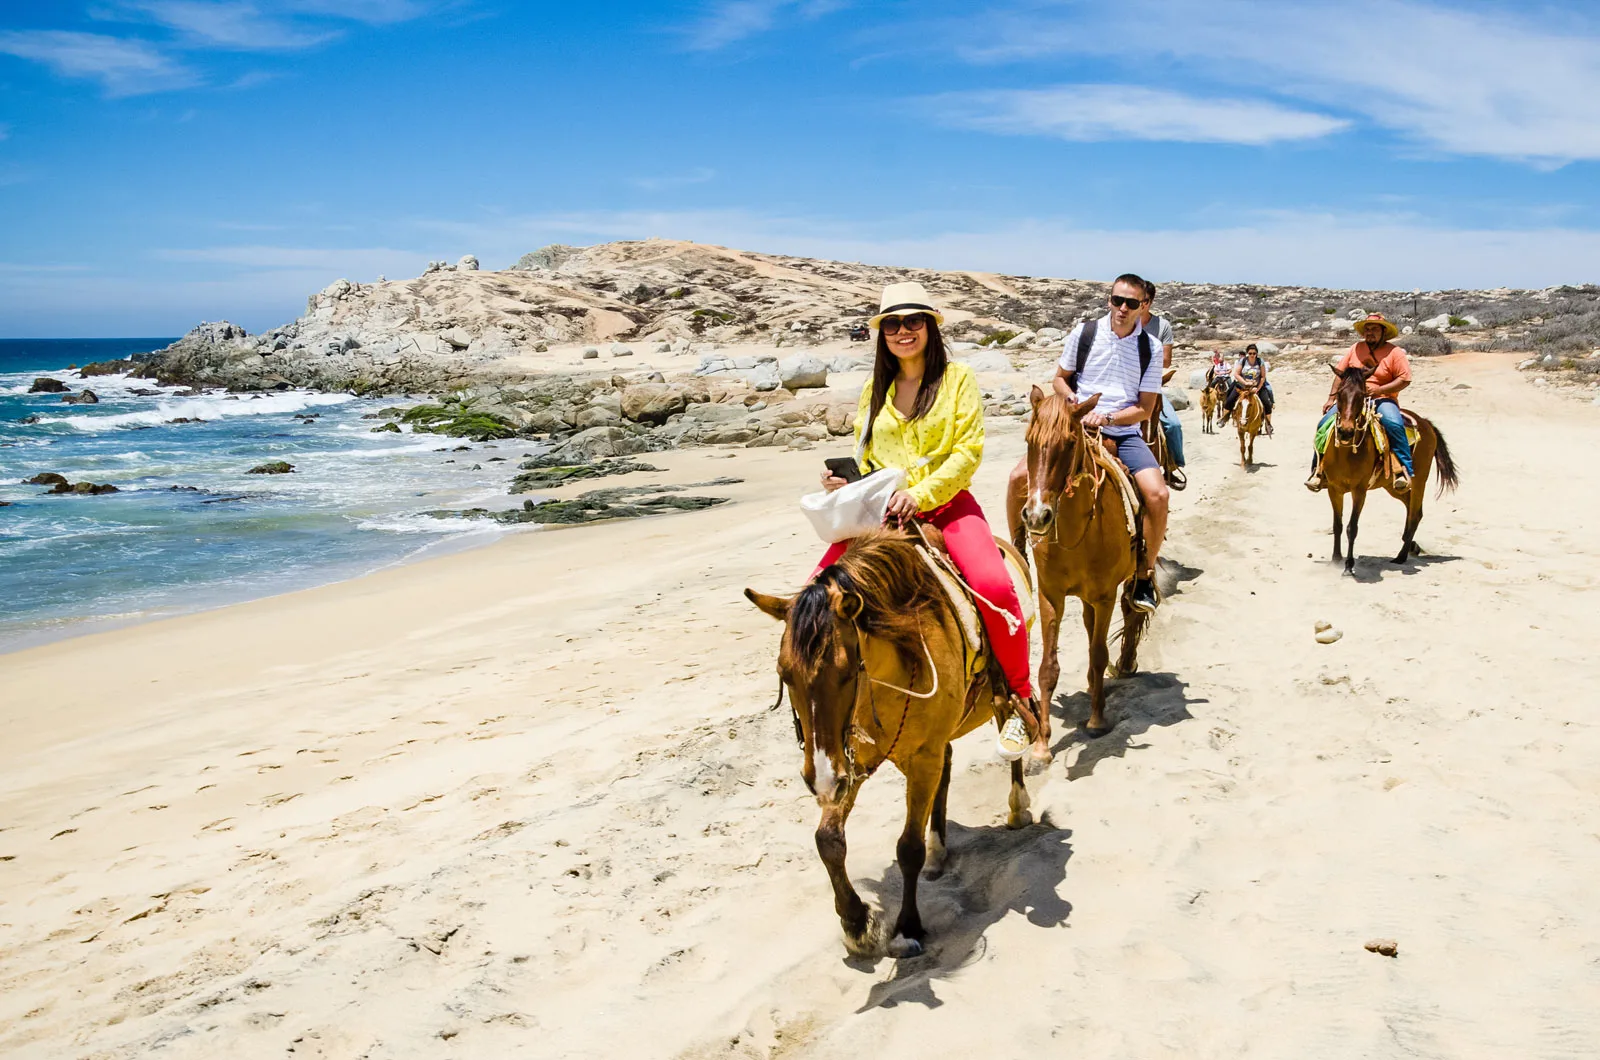 Horseback riding on the beach in Los Cabos